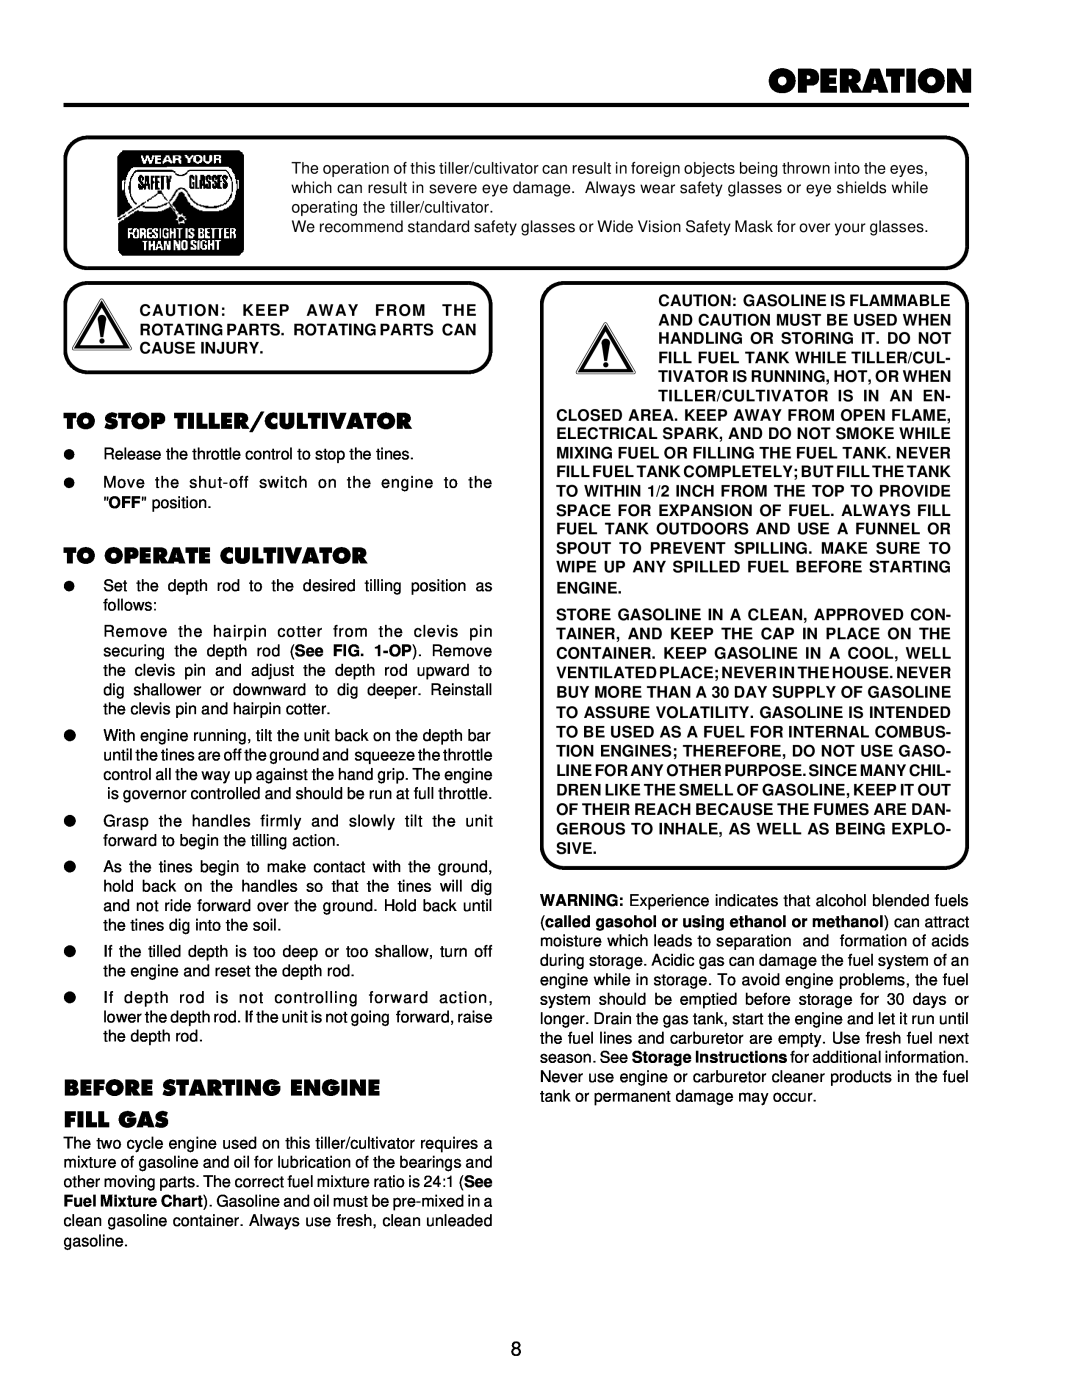 Husqvarna CT16 owner manual To Stop Tiller/Cultivator, To Operate Cultivator, Before Starting Engine Fill Gas, Operation 